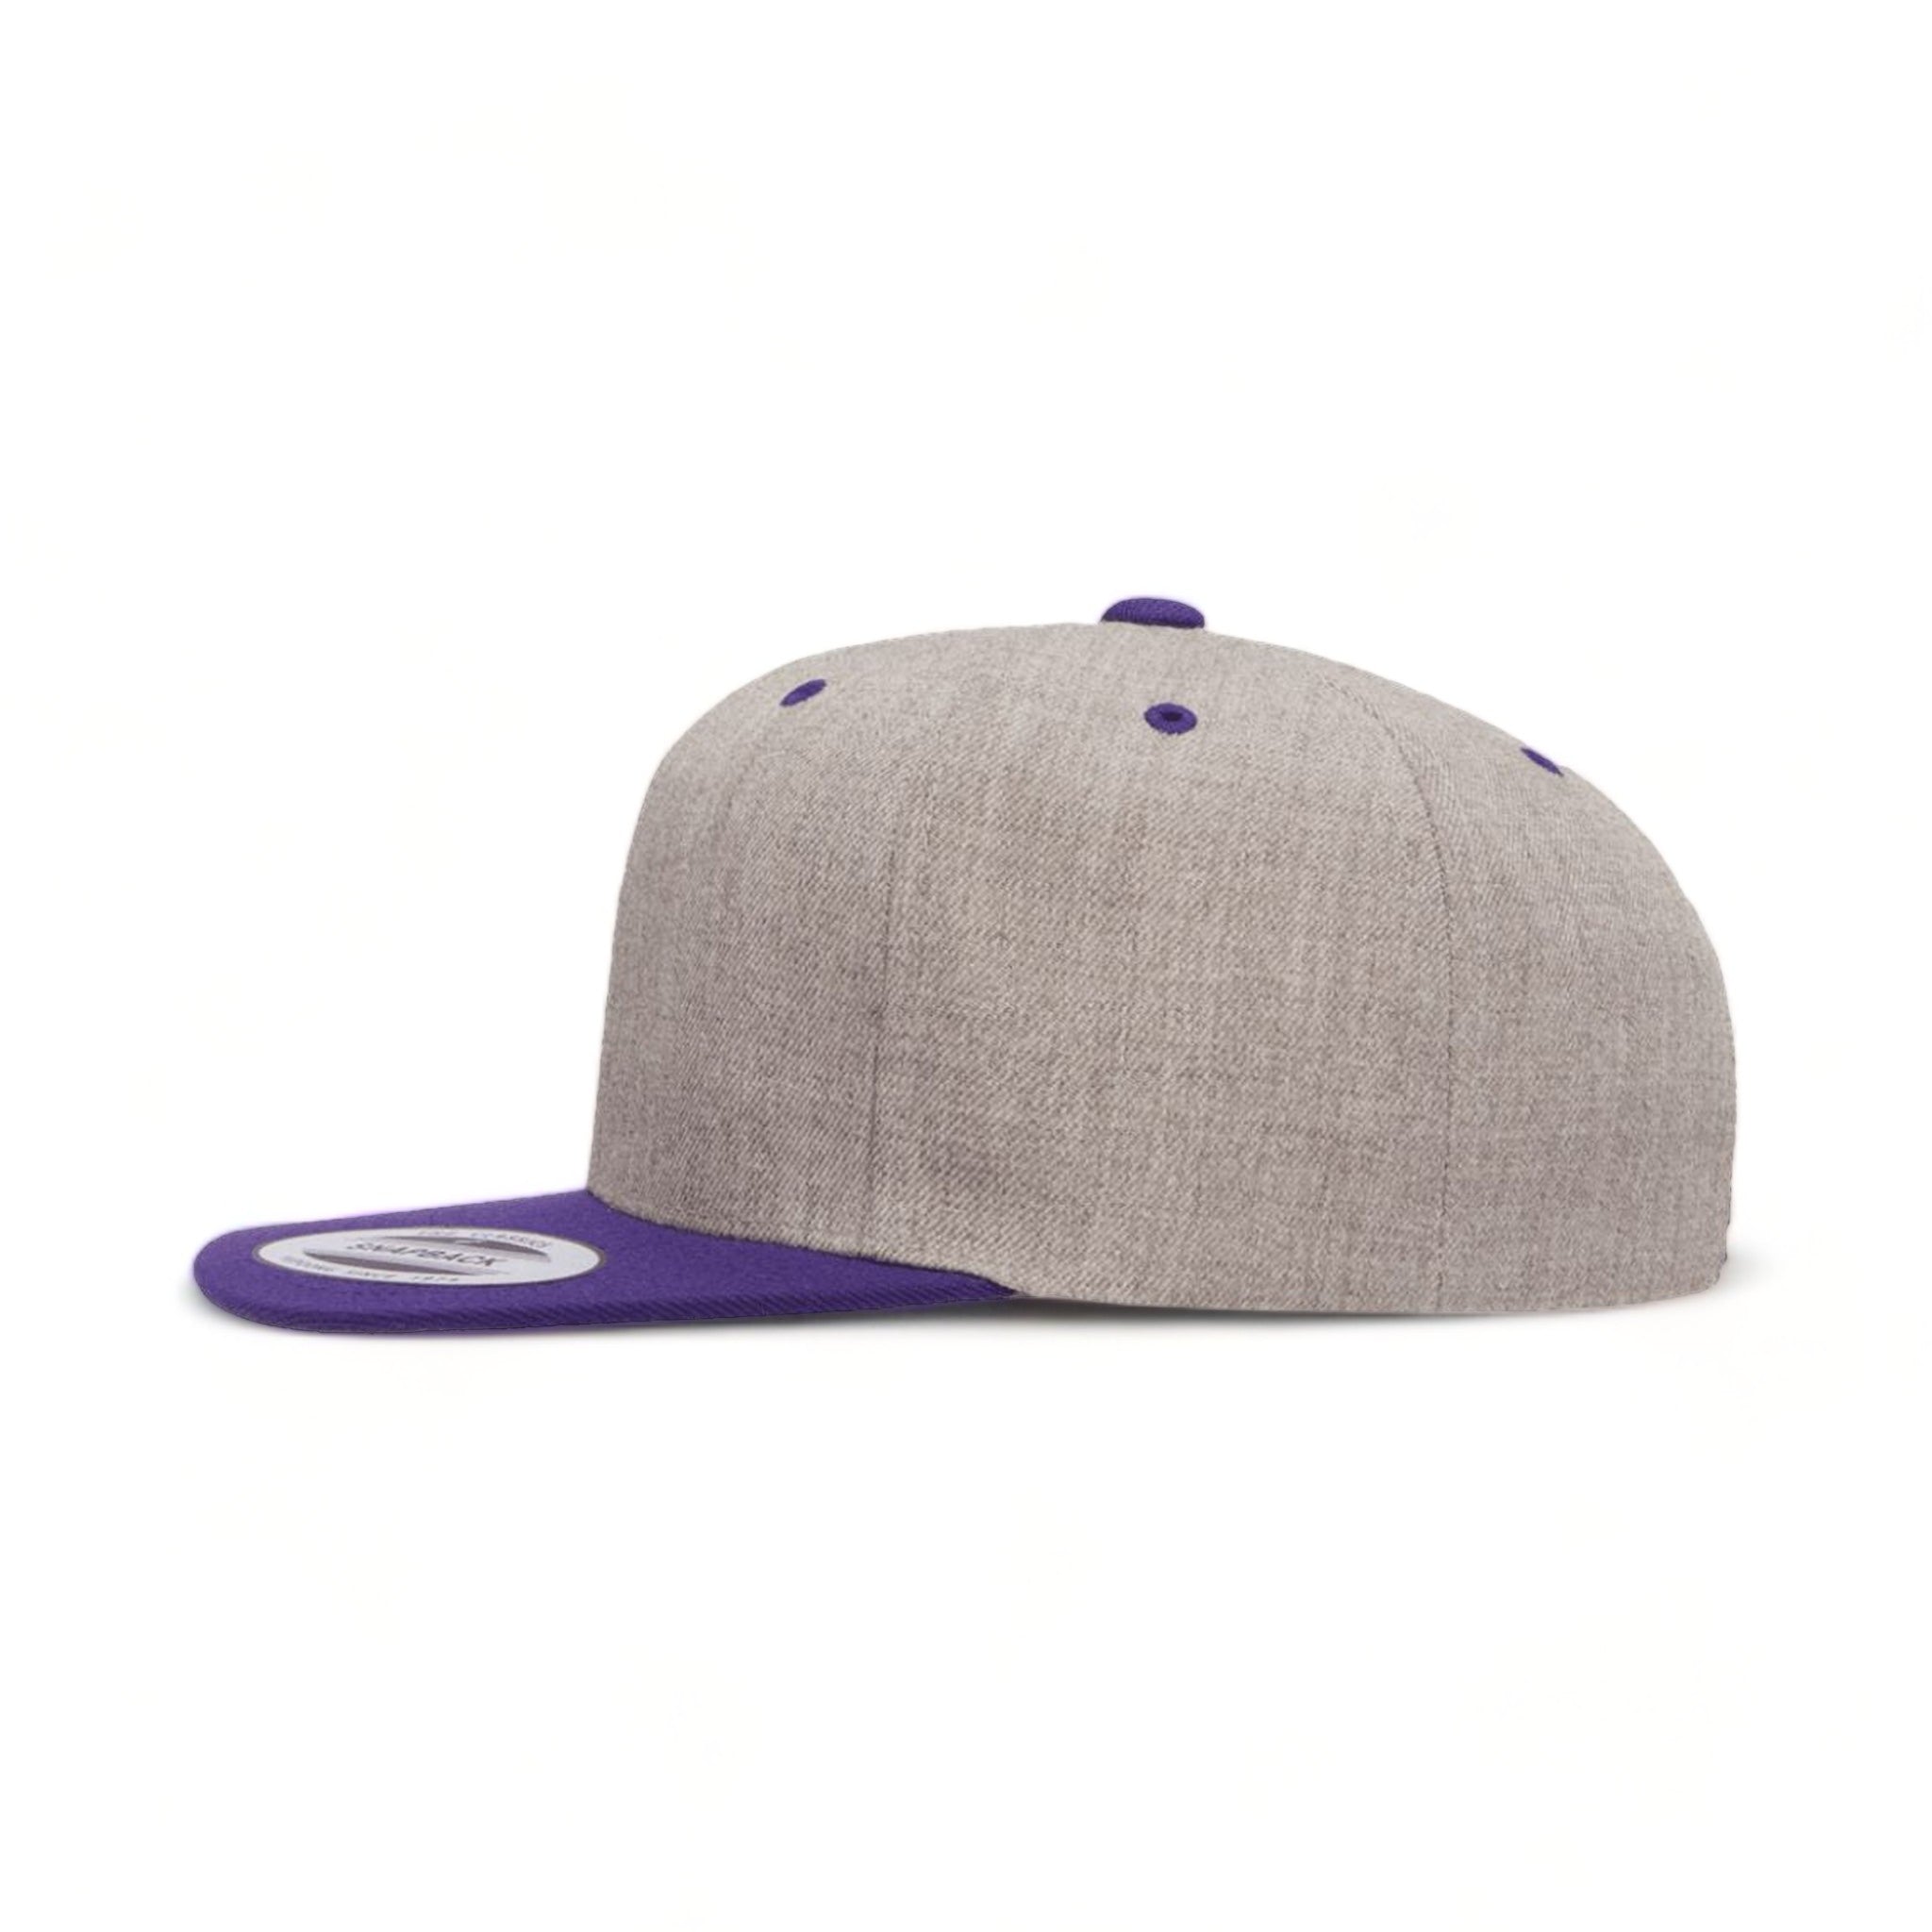 Side view of YP Classics 6089M custom hat in heather grey and purple